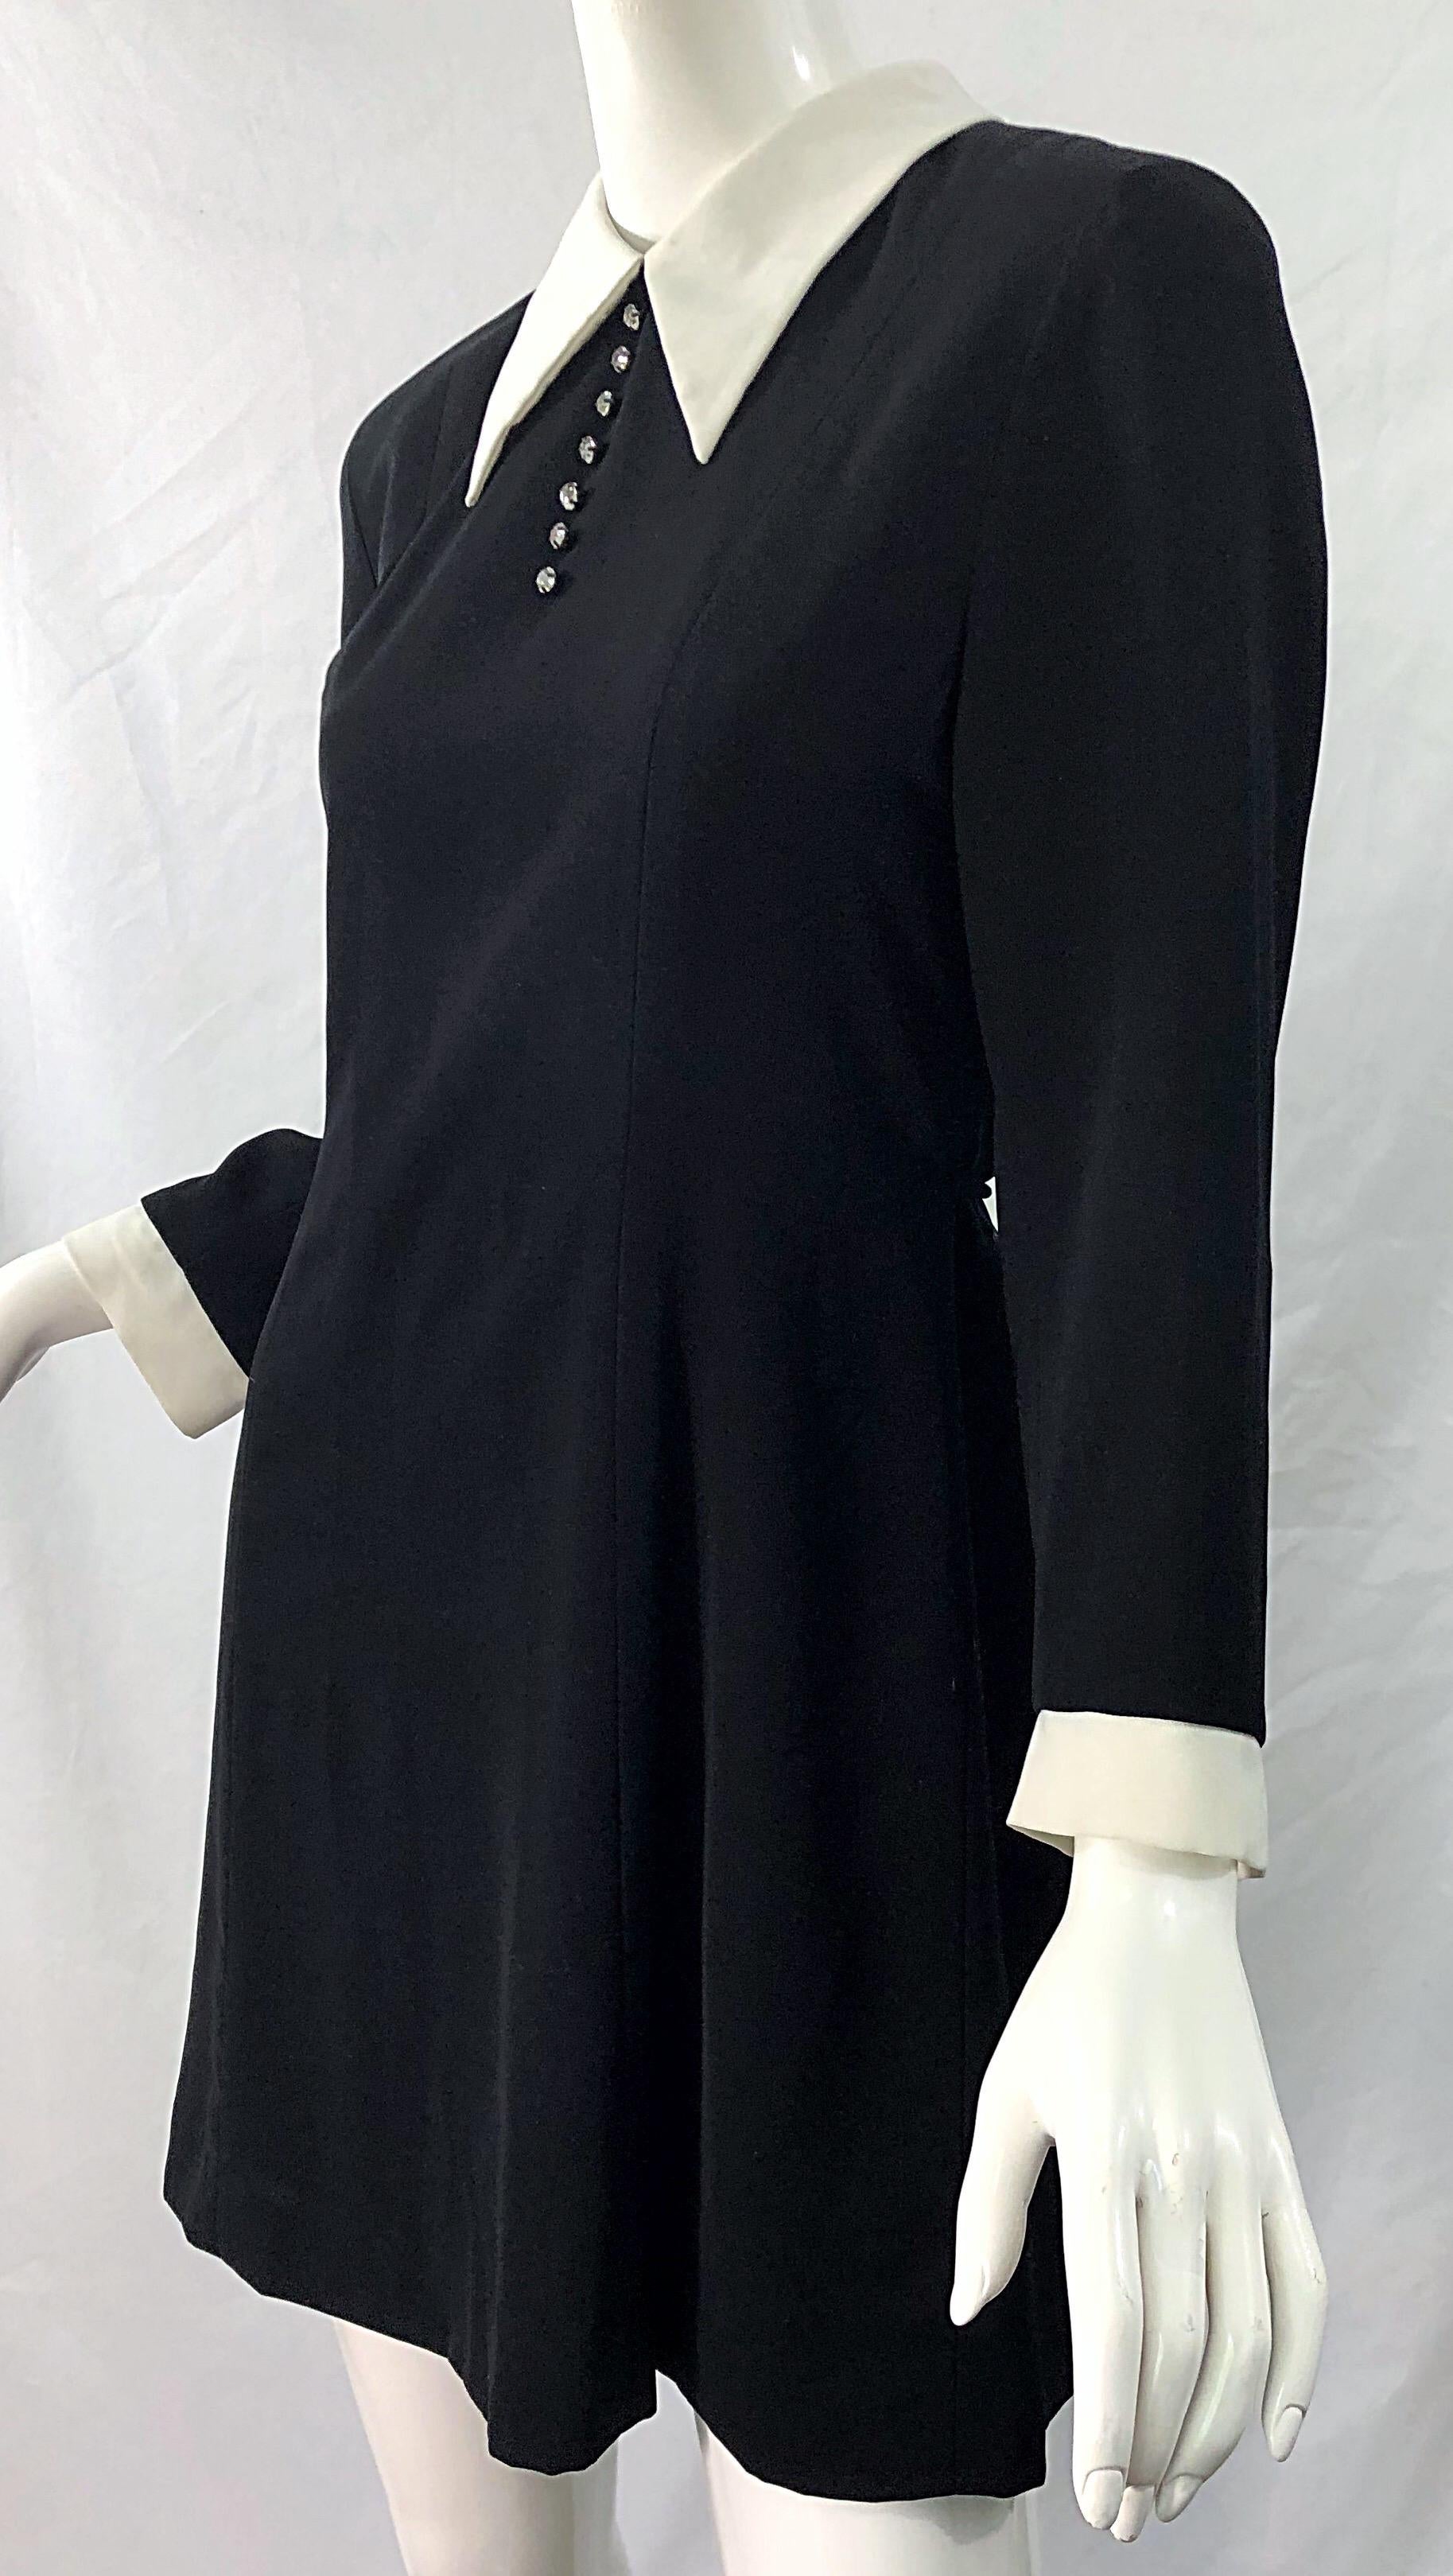 Vintage Givenchy 1990s Black and White Rhinestone Long Sleeve 90s Mini Dress For Sale 5